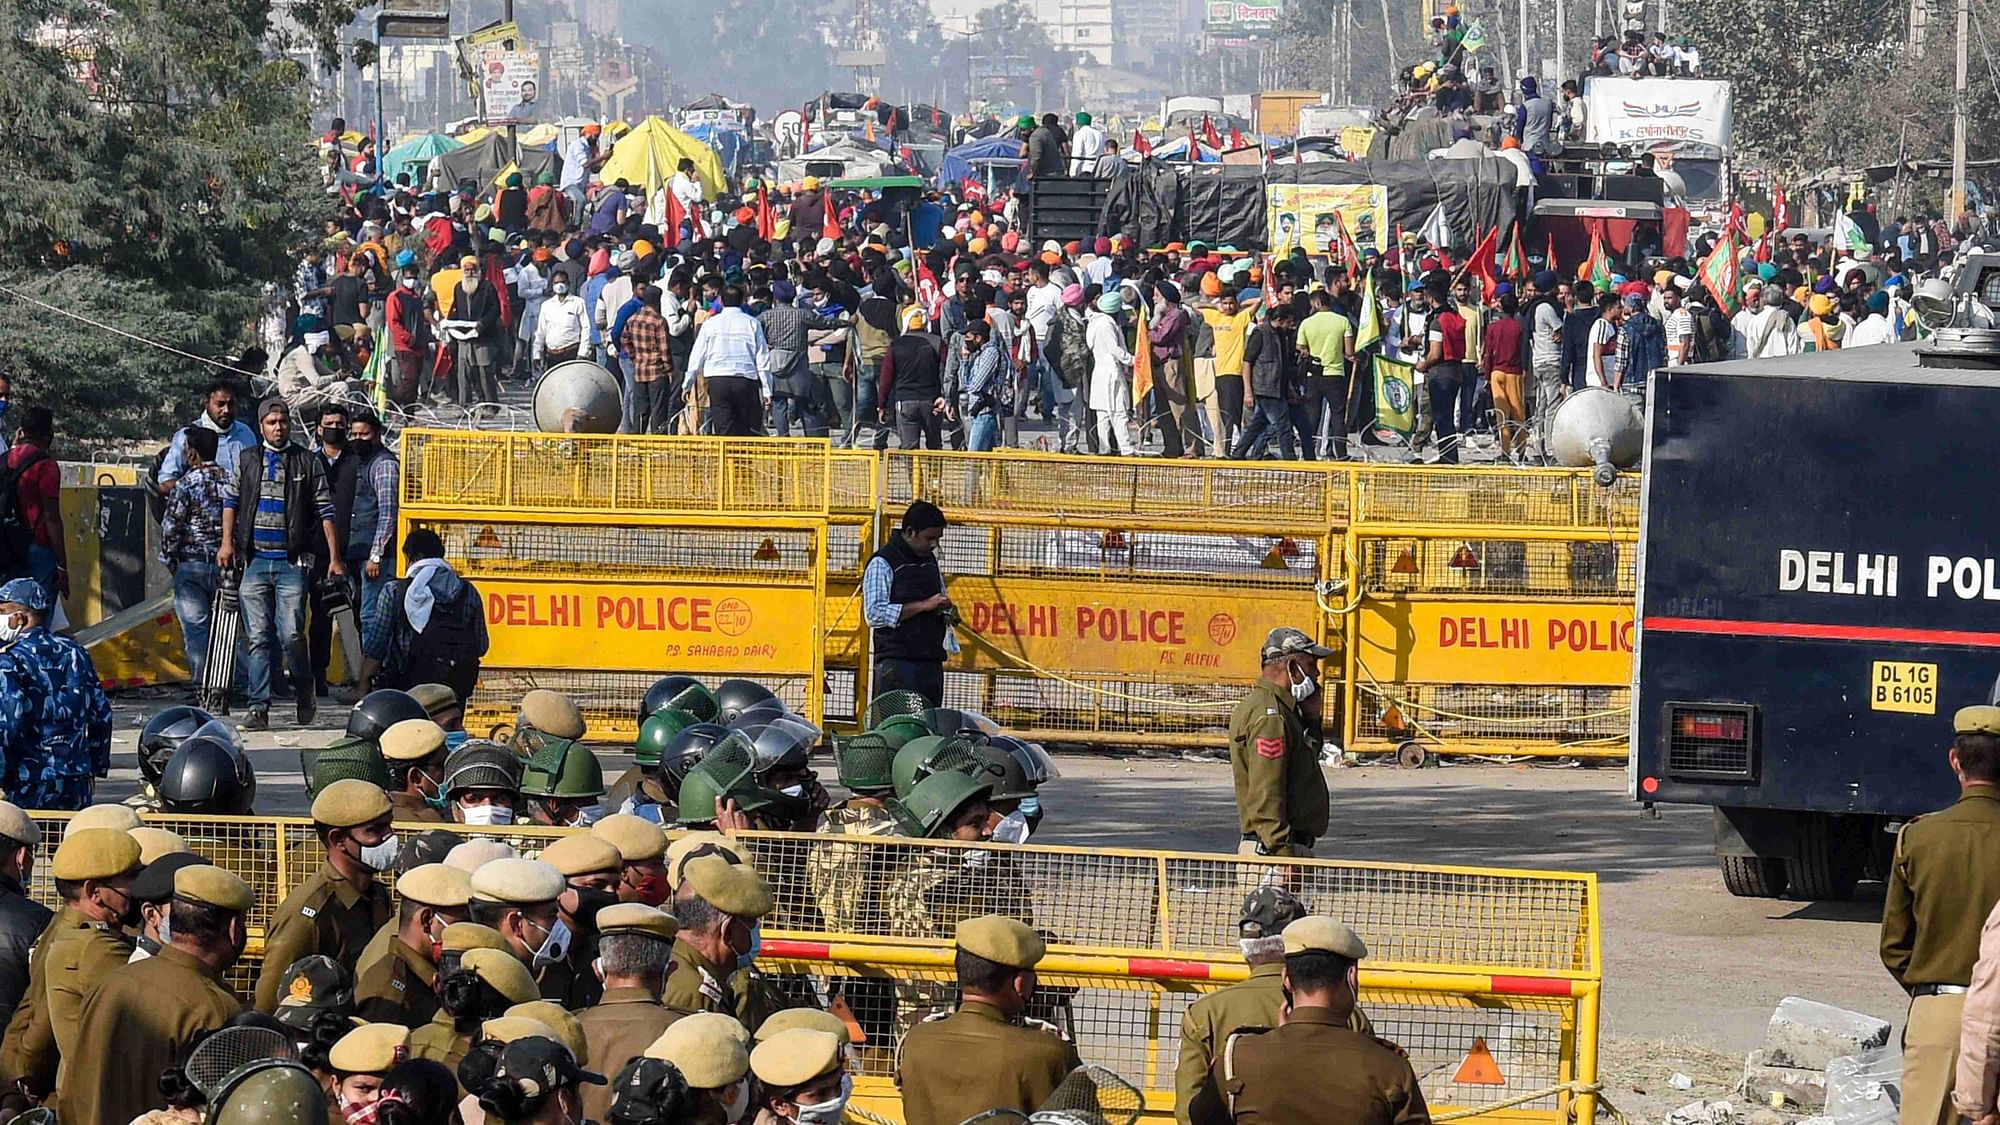 Police stand guard near a barricade as farmers protest at Singhu border during their Delhi Chalo march against the Centres farm reform laws, in New Delhi.